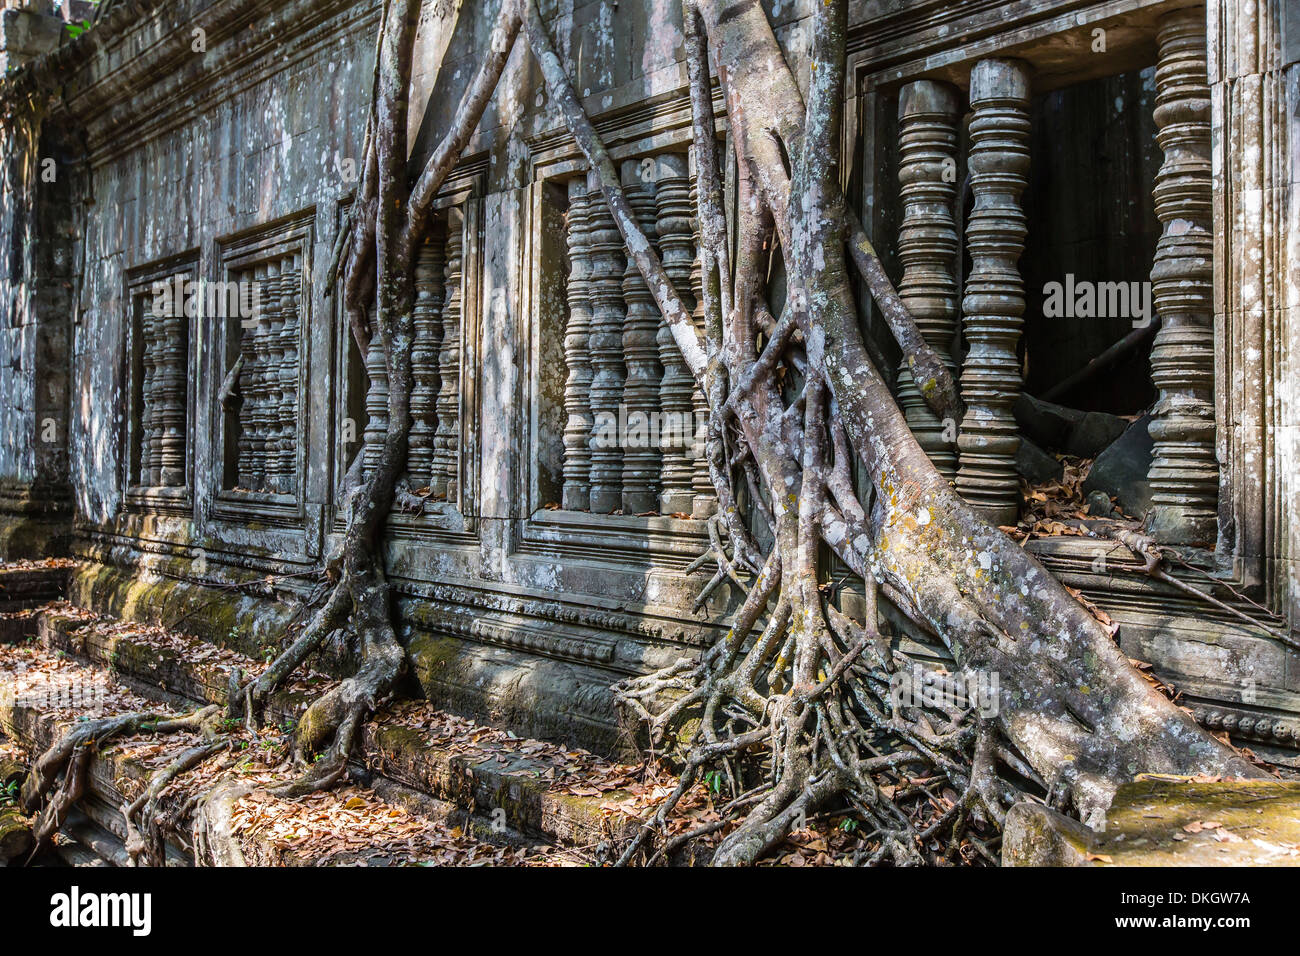 Beng Mealea Temple, overgrown and falling down, Angkor, UNESCO World Heritage Site, Siem Reap Province, Cambodia, Southeast Asia Stock Photo